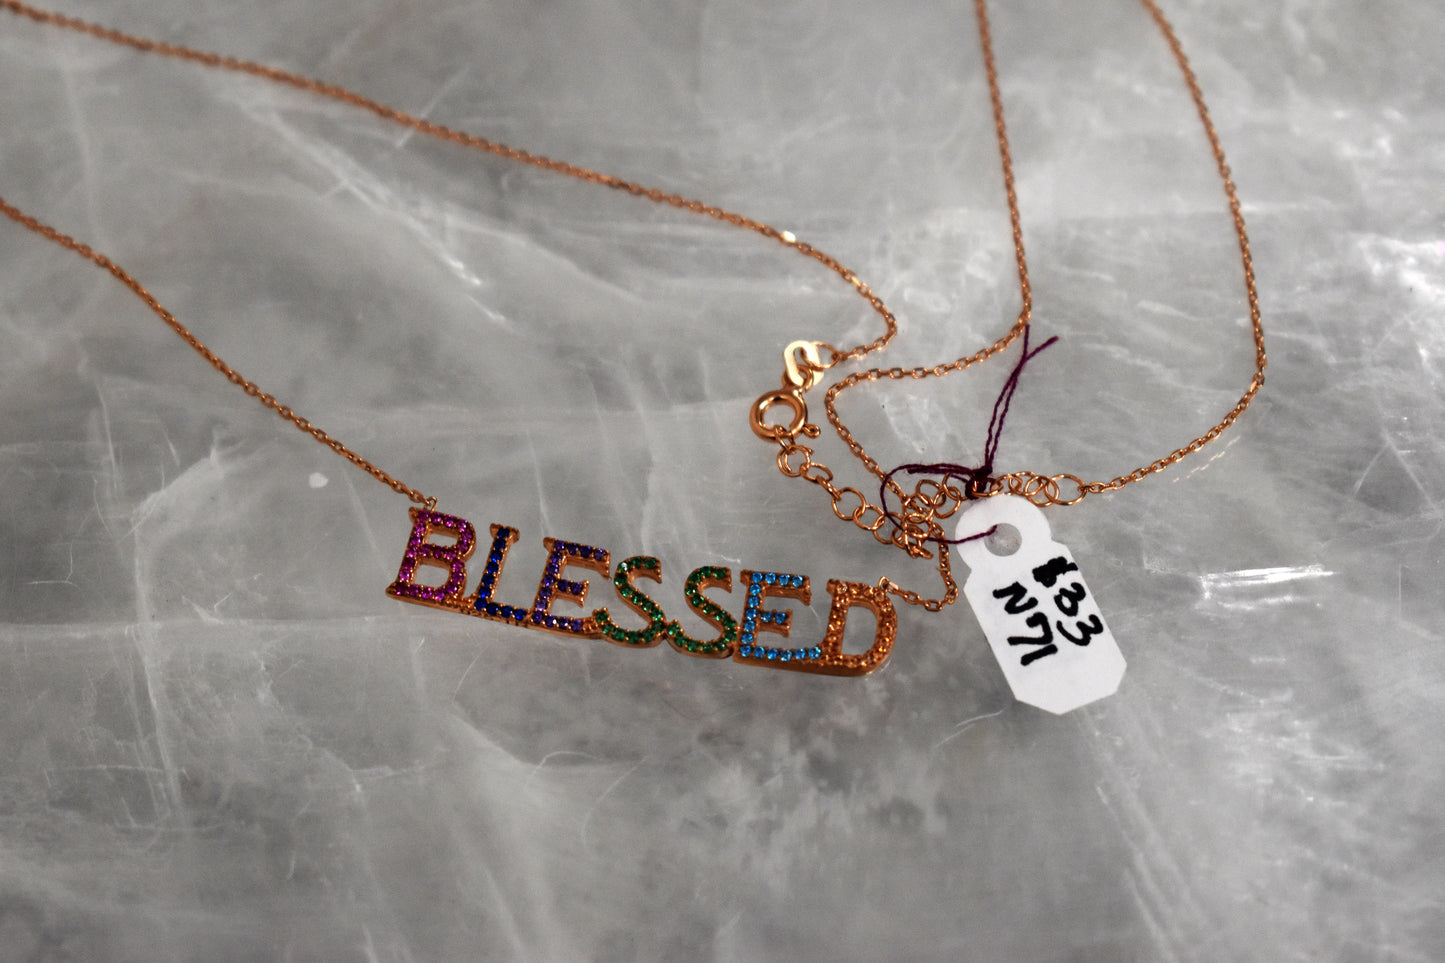 stones-of-transformation - Blessed Necklace - Stones of Transformation - 